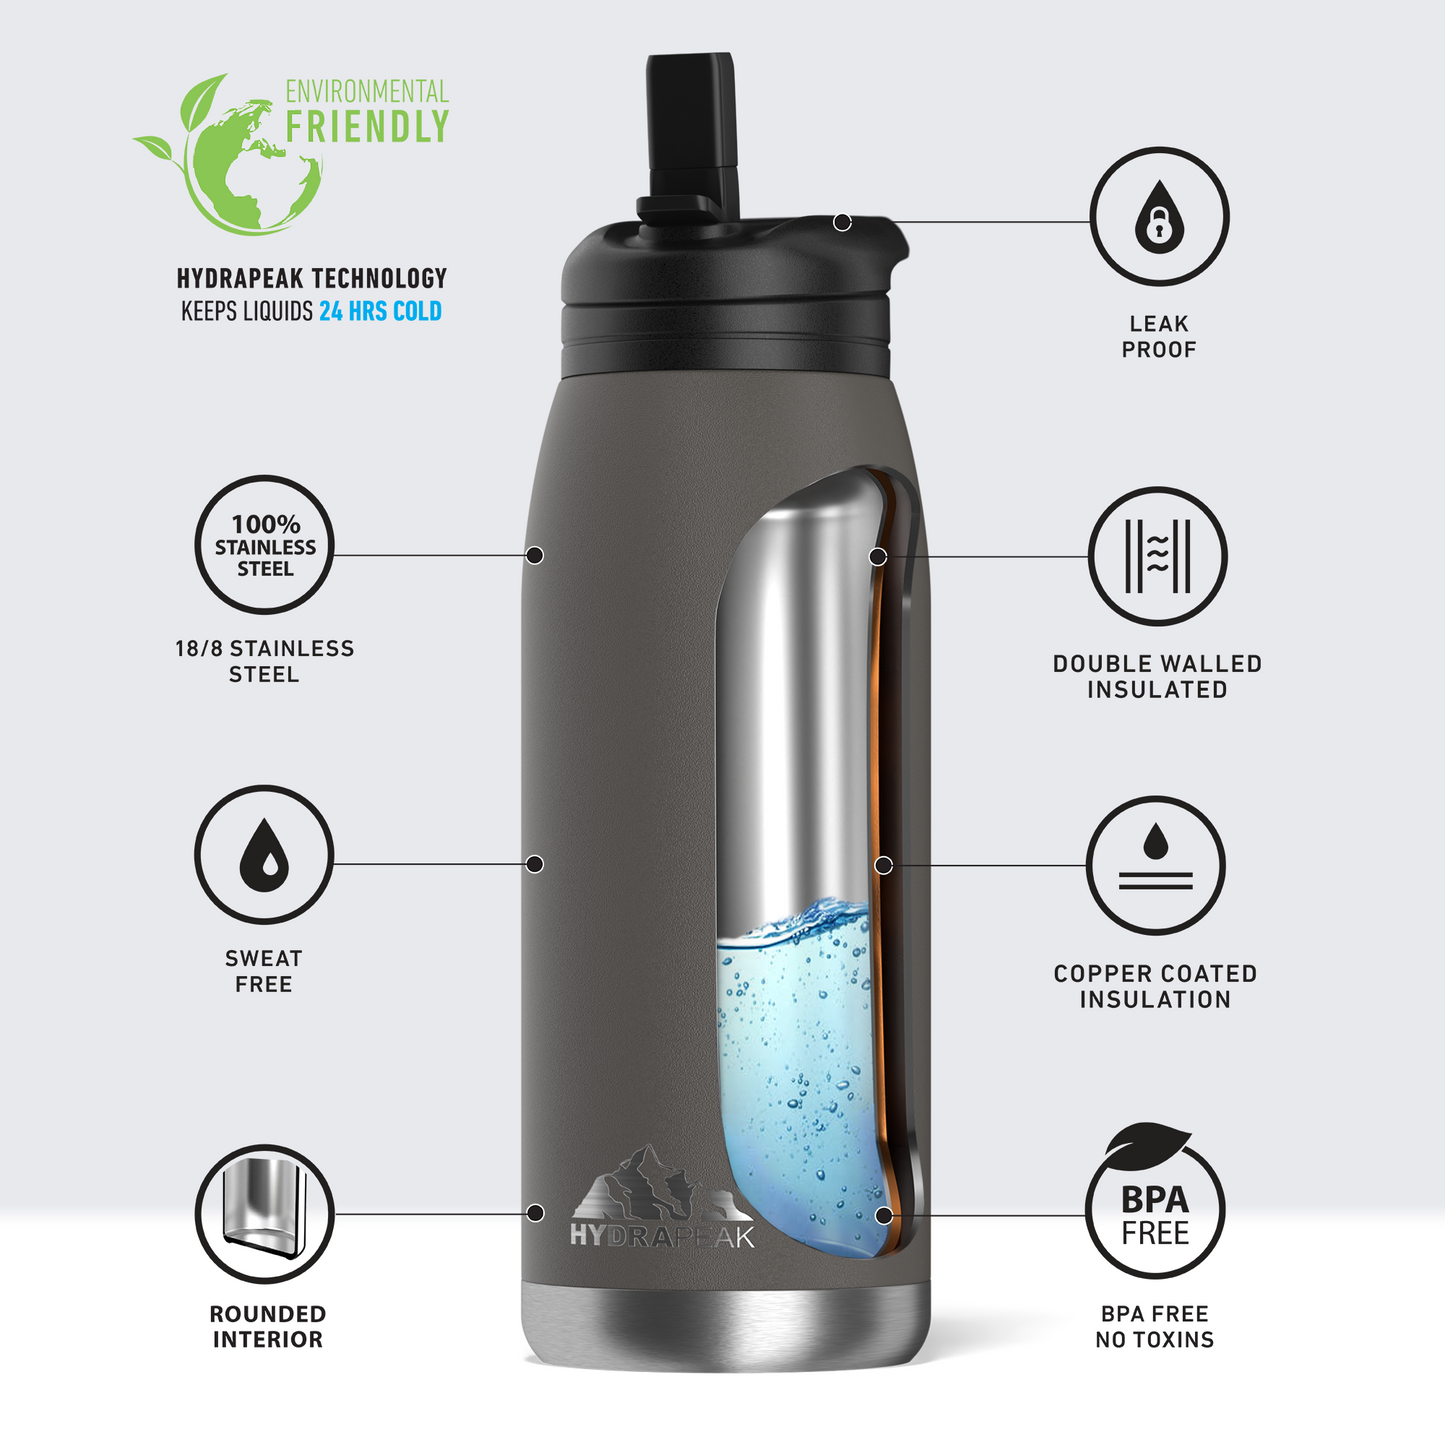 Flow 32oz Stainless Steel Insulated Water Bottle with Straw Lid Bottle- Graphite